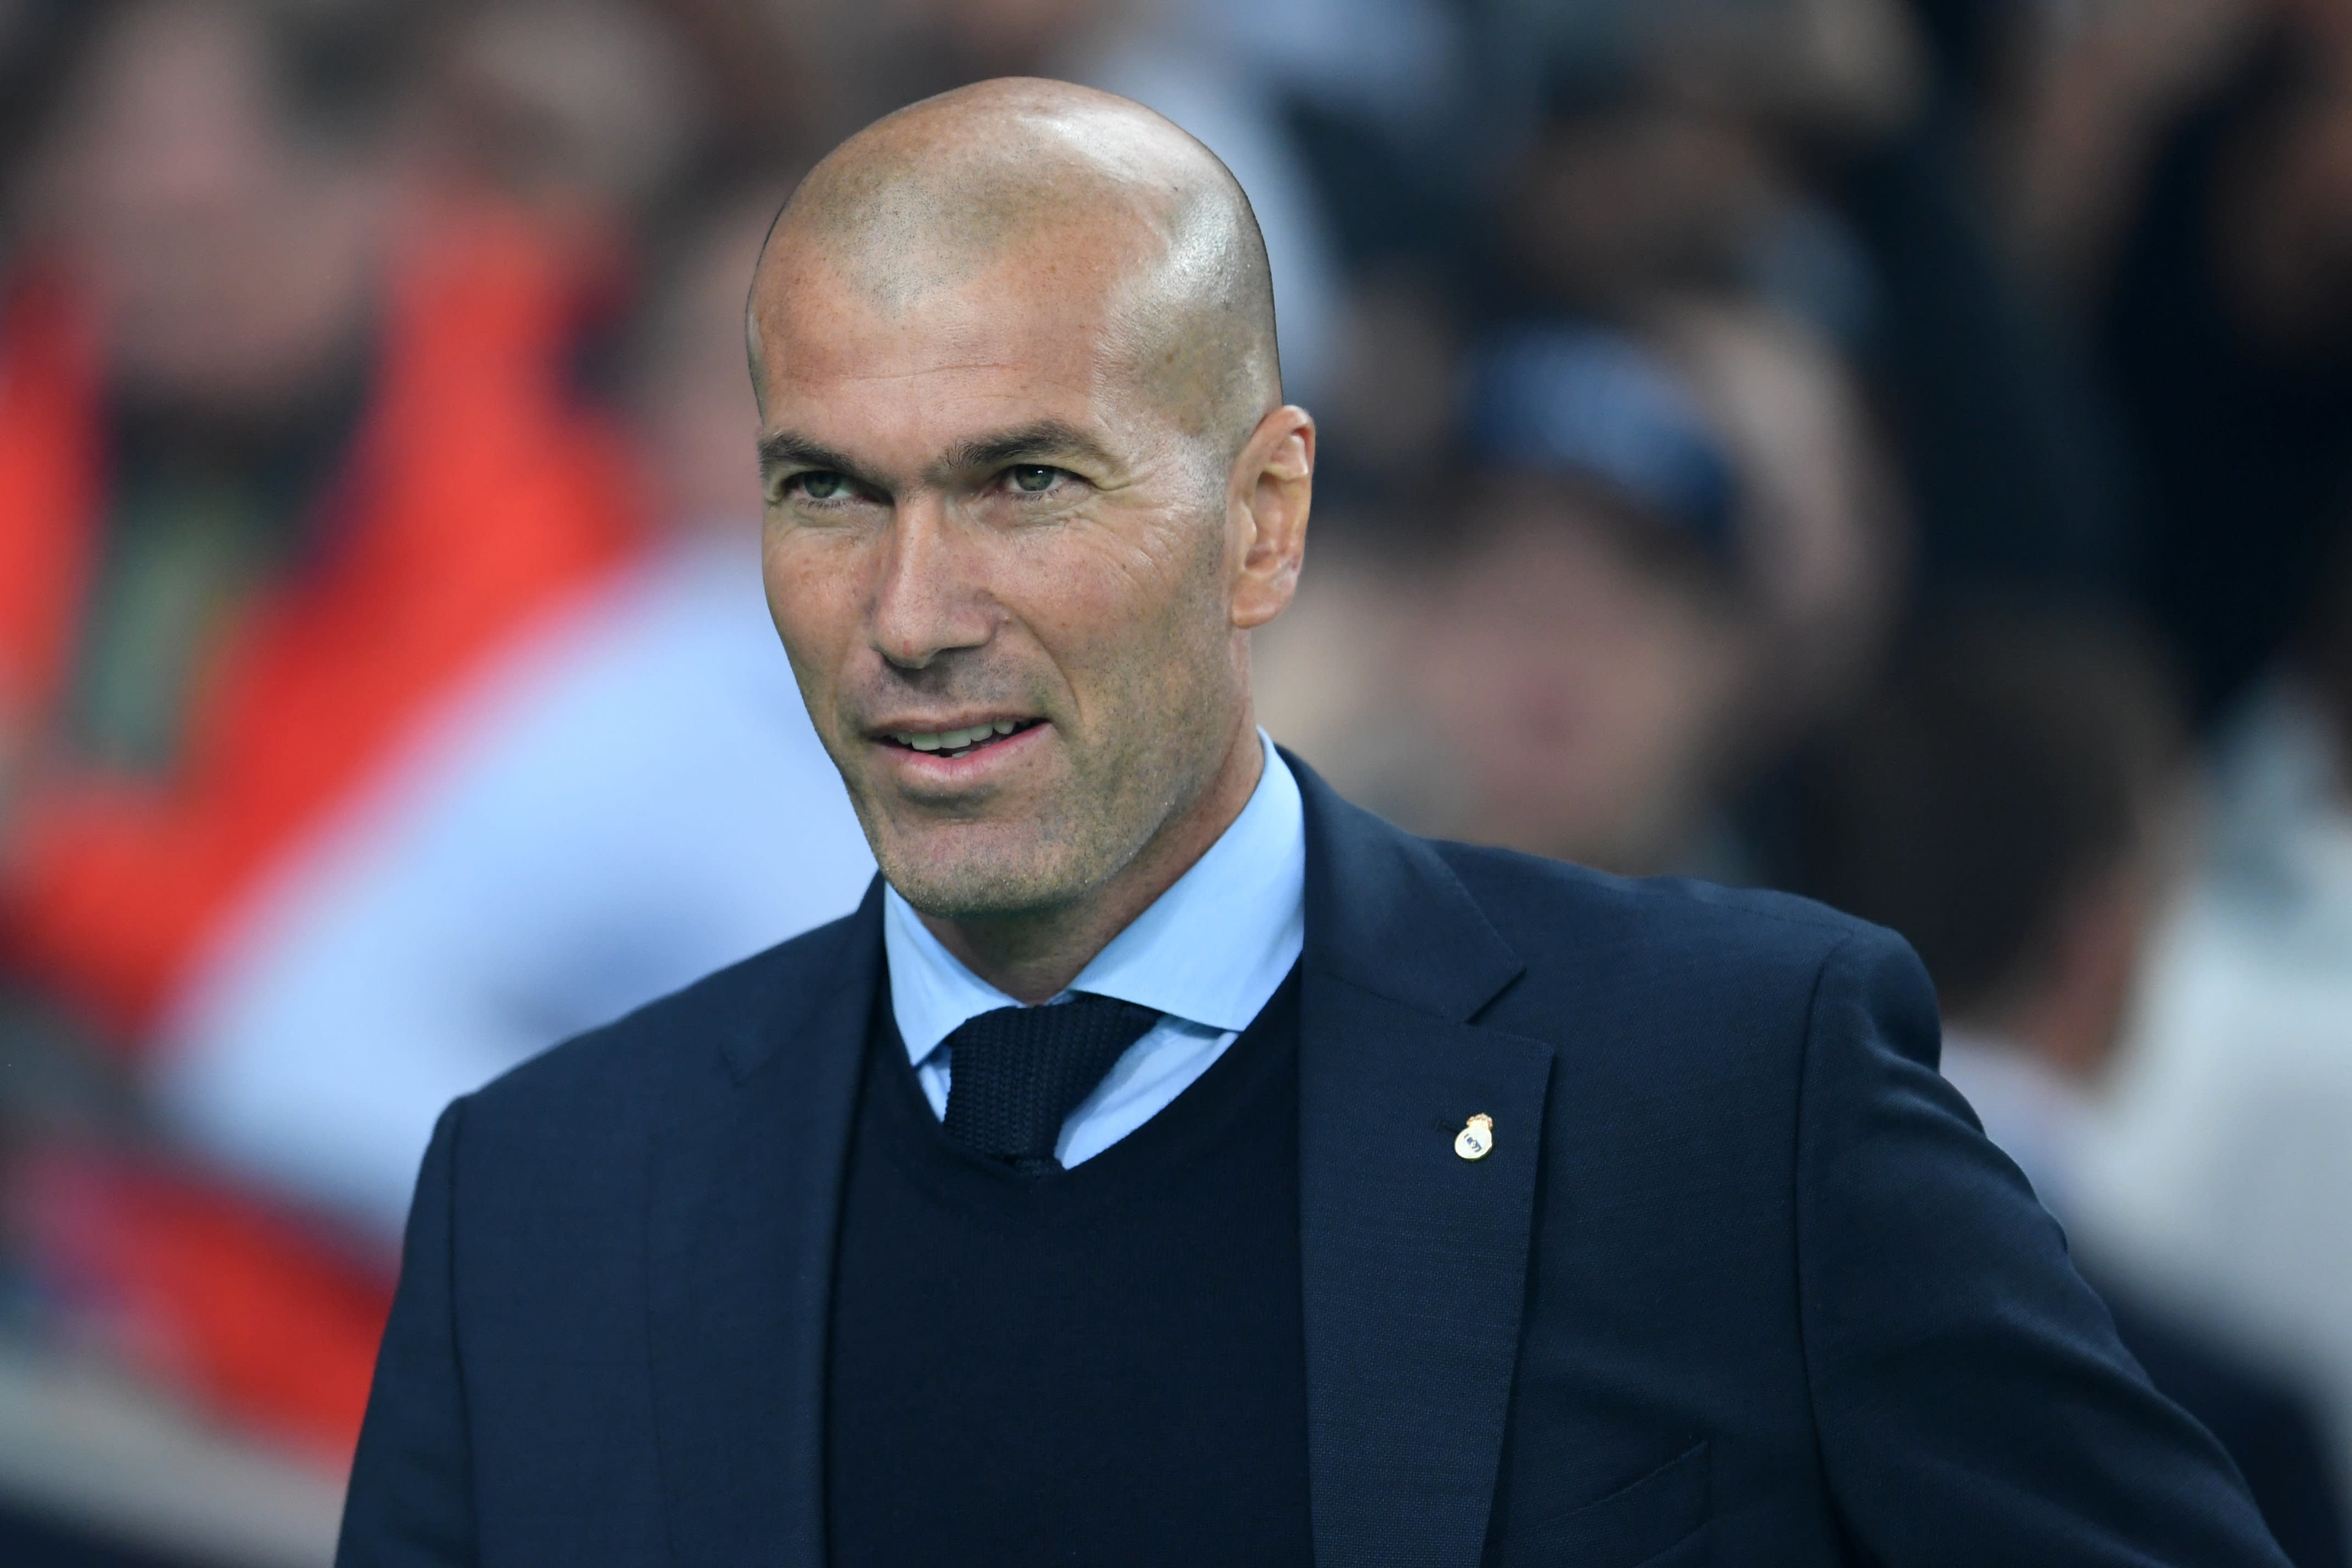 Real Madrid appears ready to re-hire Zinedine Zidane as manager